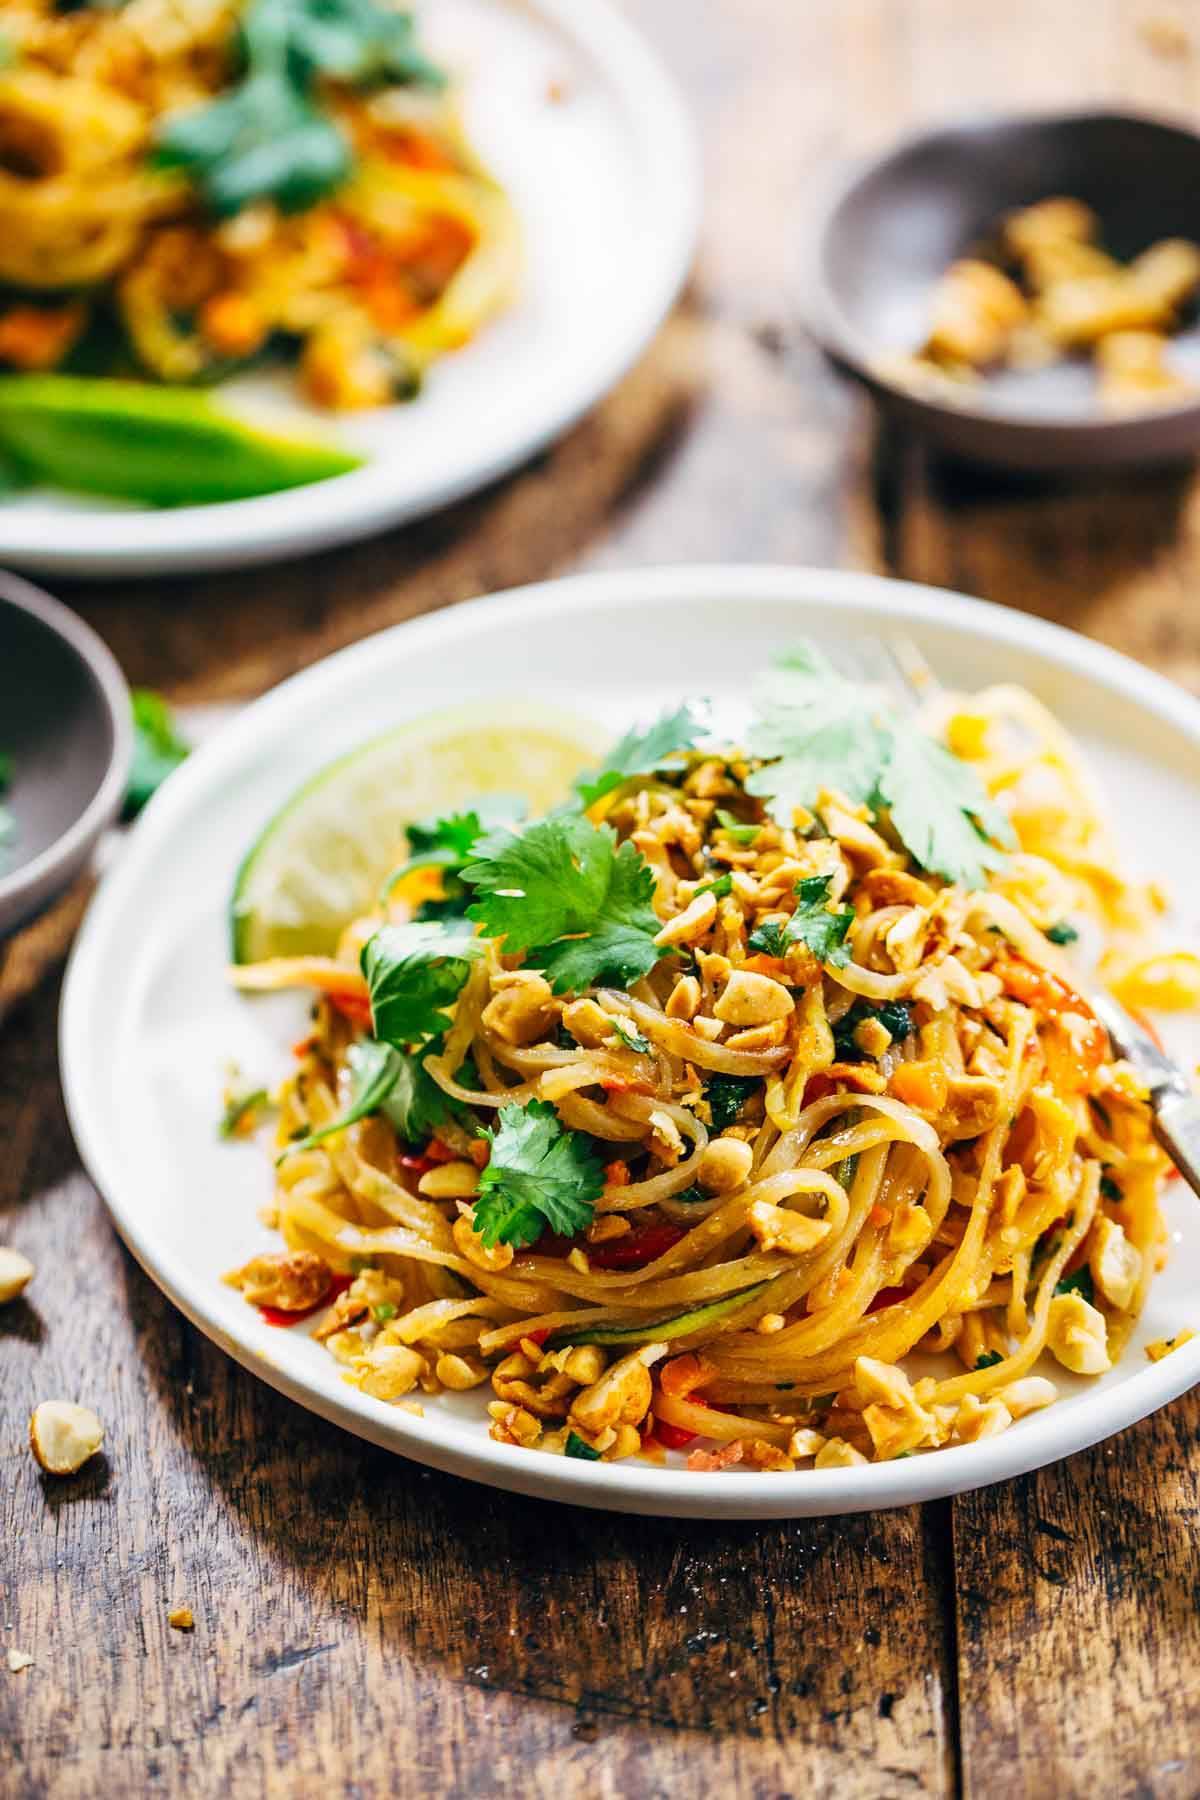 Rainbow Vegetarian Pad Thai With Peanuts And Basil Recipe Pinch Of Yum,Baked Chicken Breast Ideas